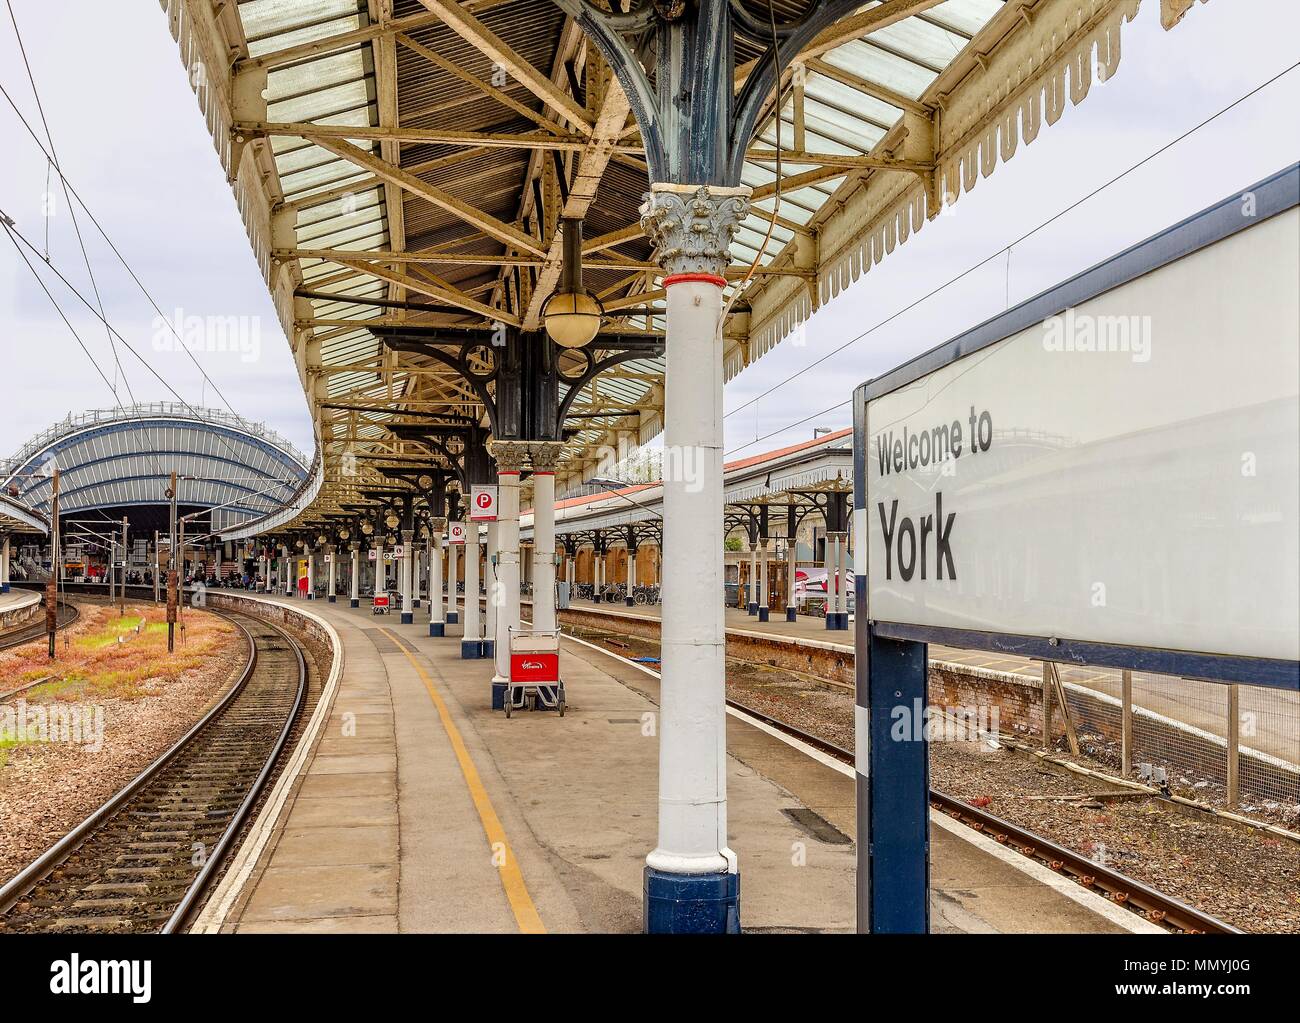 View of York railway station from the end of platform.  An ornate Victorian canopy is overhead. Stock Photo